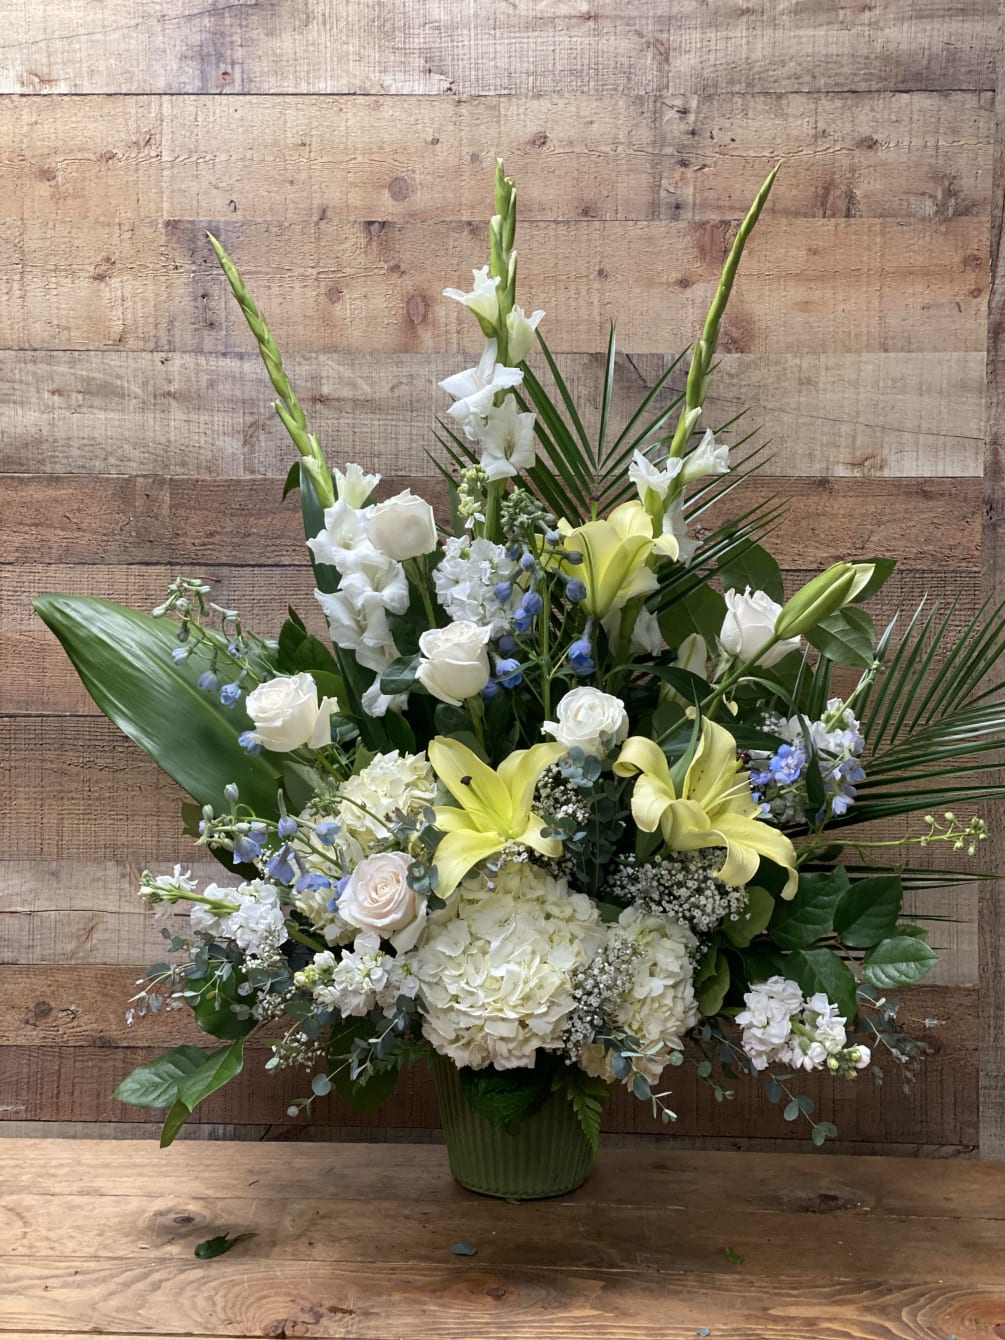 A beautiful arrangement for a service or to send to the home